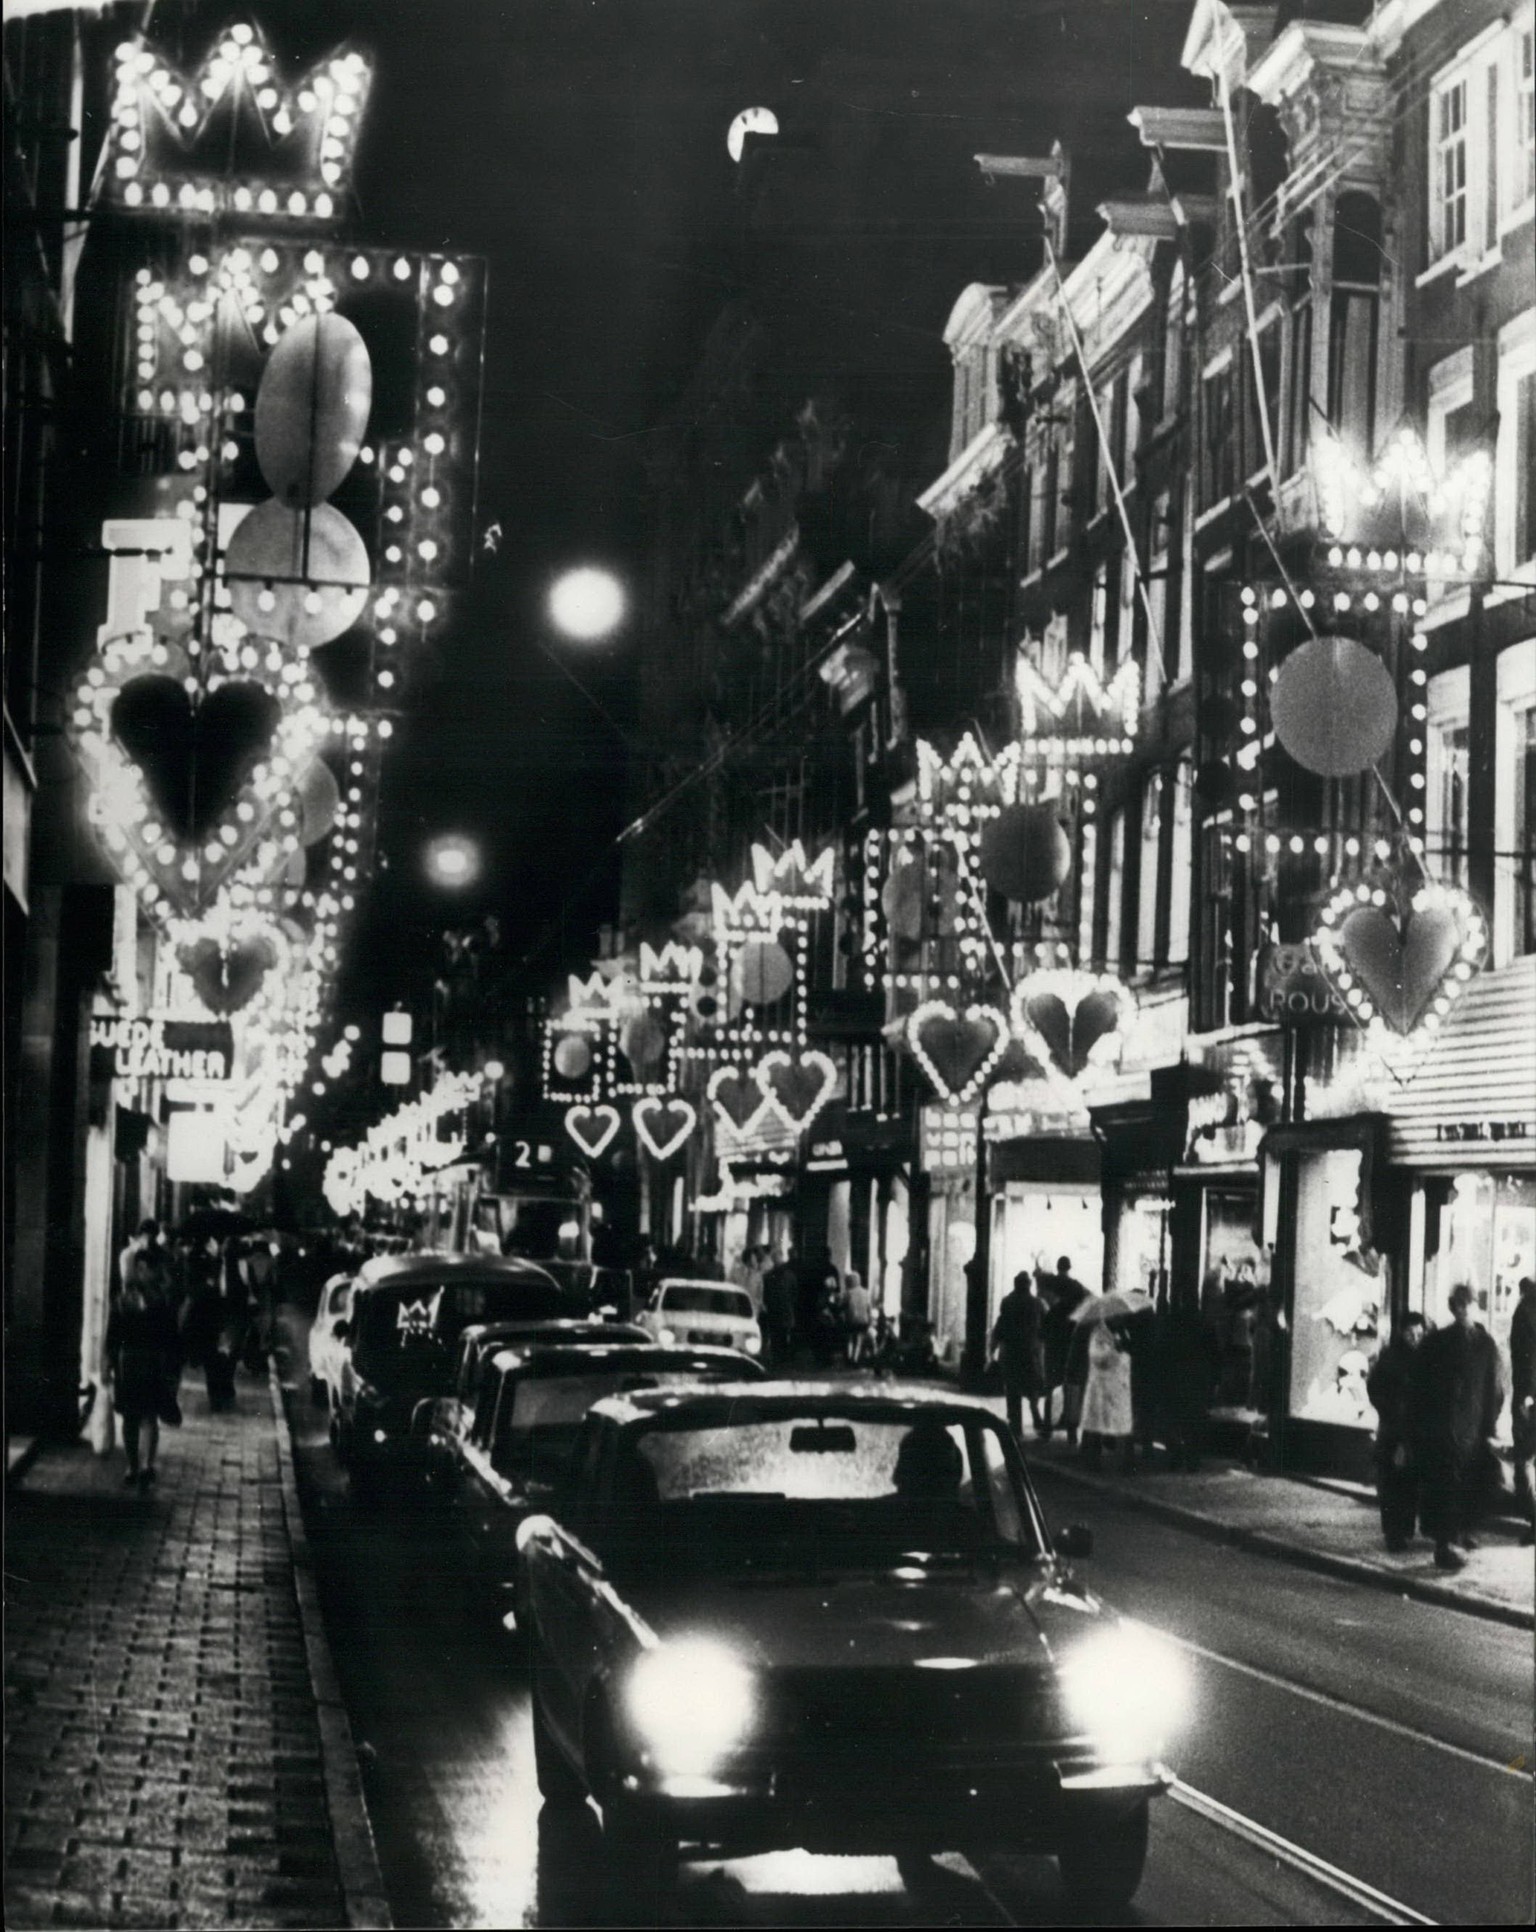 Dec. 12, 1970 - Christmas Illuminations in Amsterdam: With the approach of the Christmas festival festivities illuminations have appeared all over Amsterdam - and here is pictured the decoration in th ...